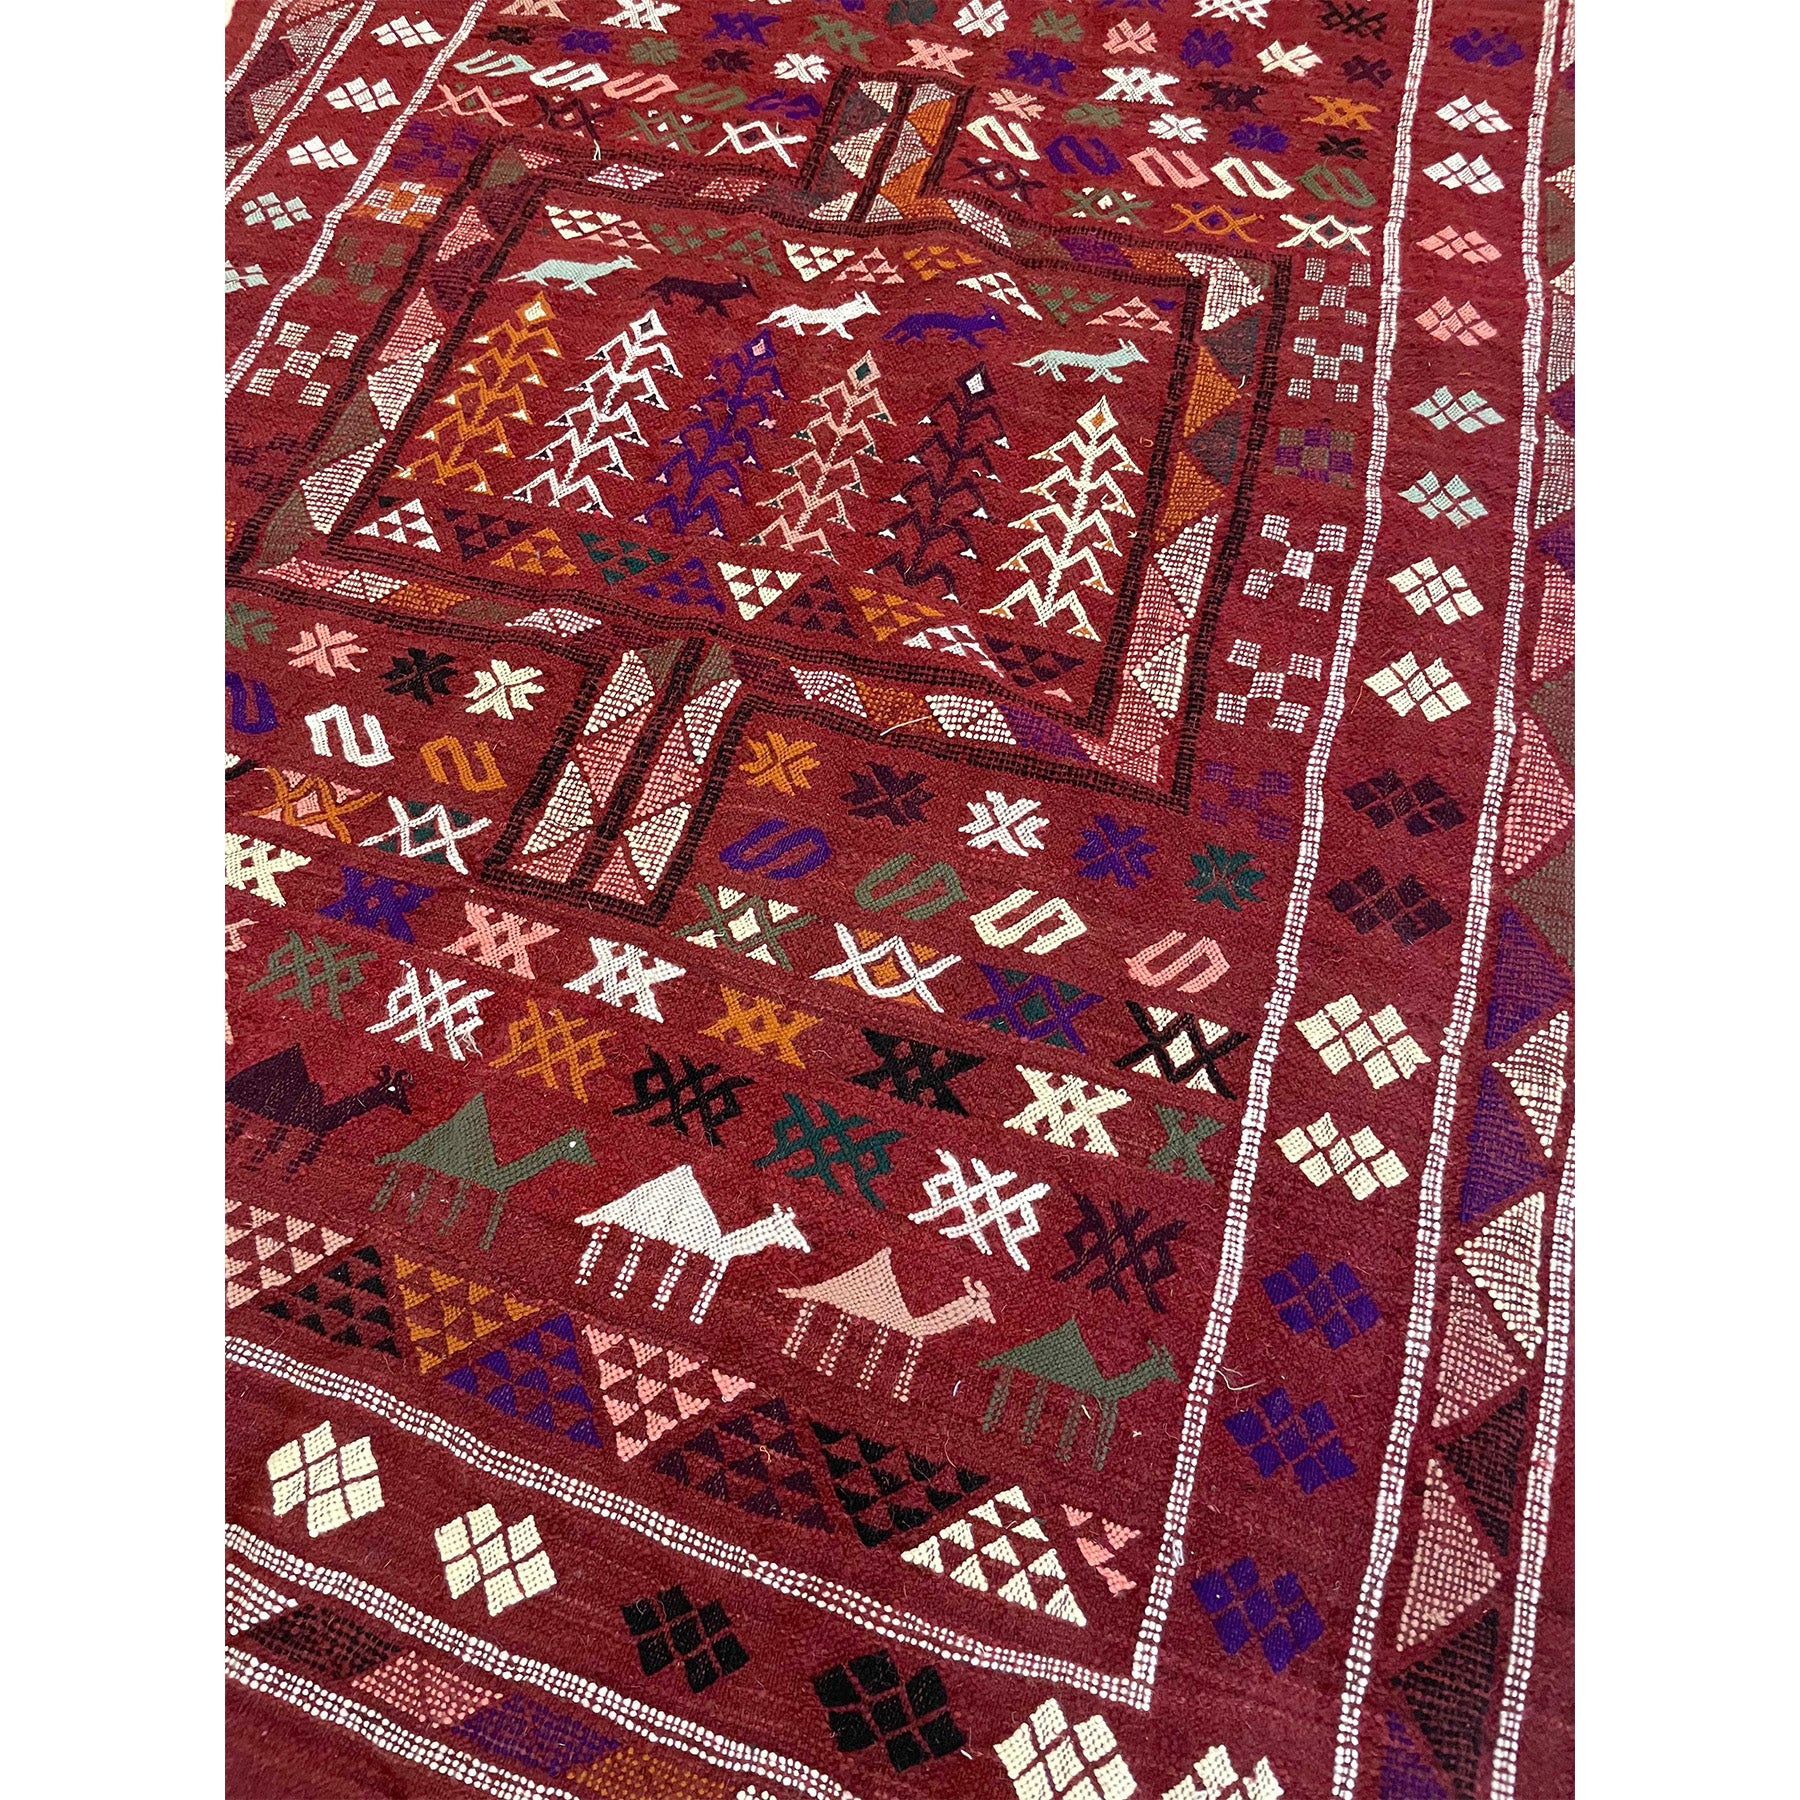 Medium sized 4' x 6' Moroccan berber flatweave kilim in red that is fully customizable in different sizes  | Kantara Moroccan Rugs in Los Angeles